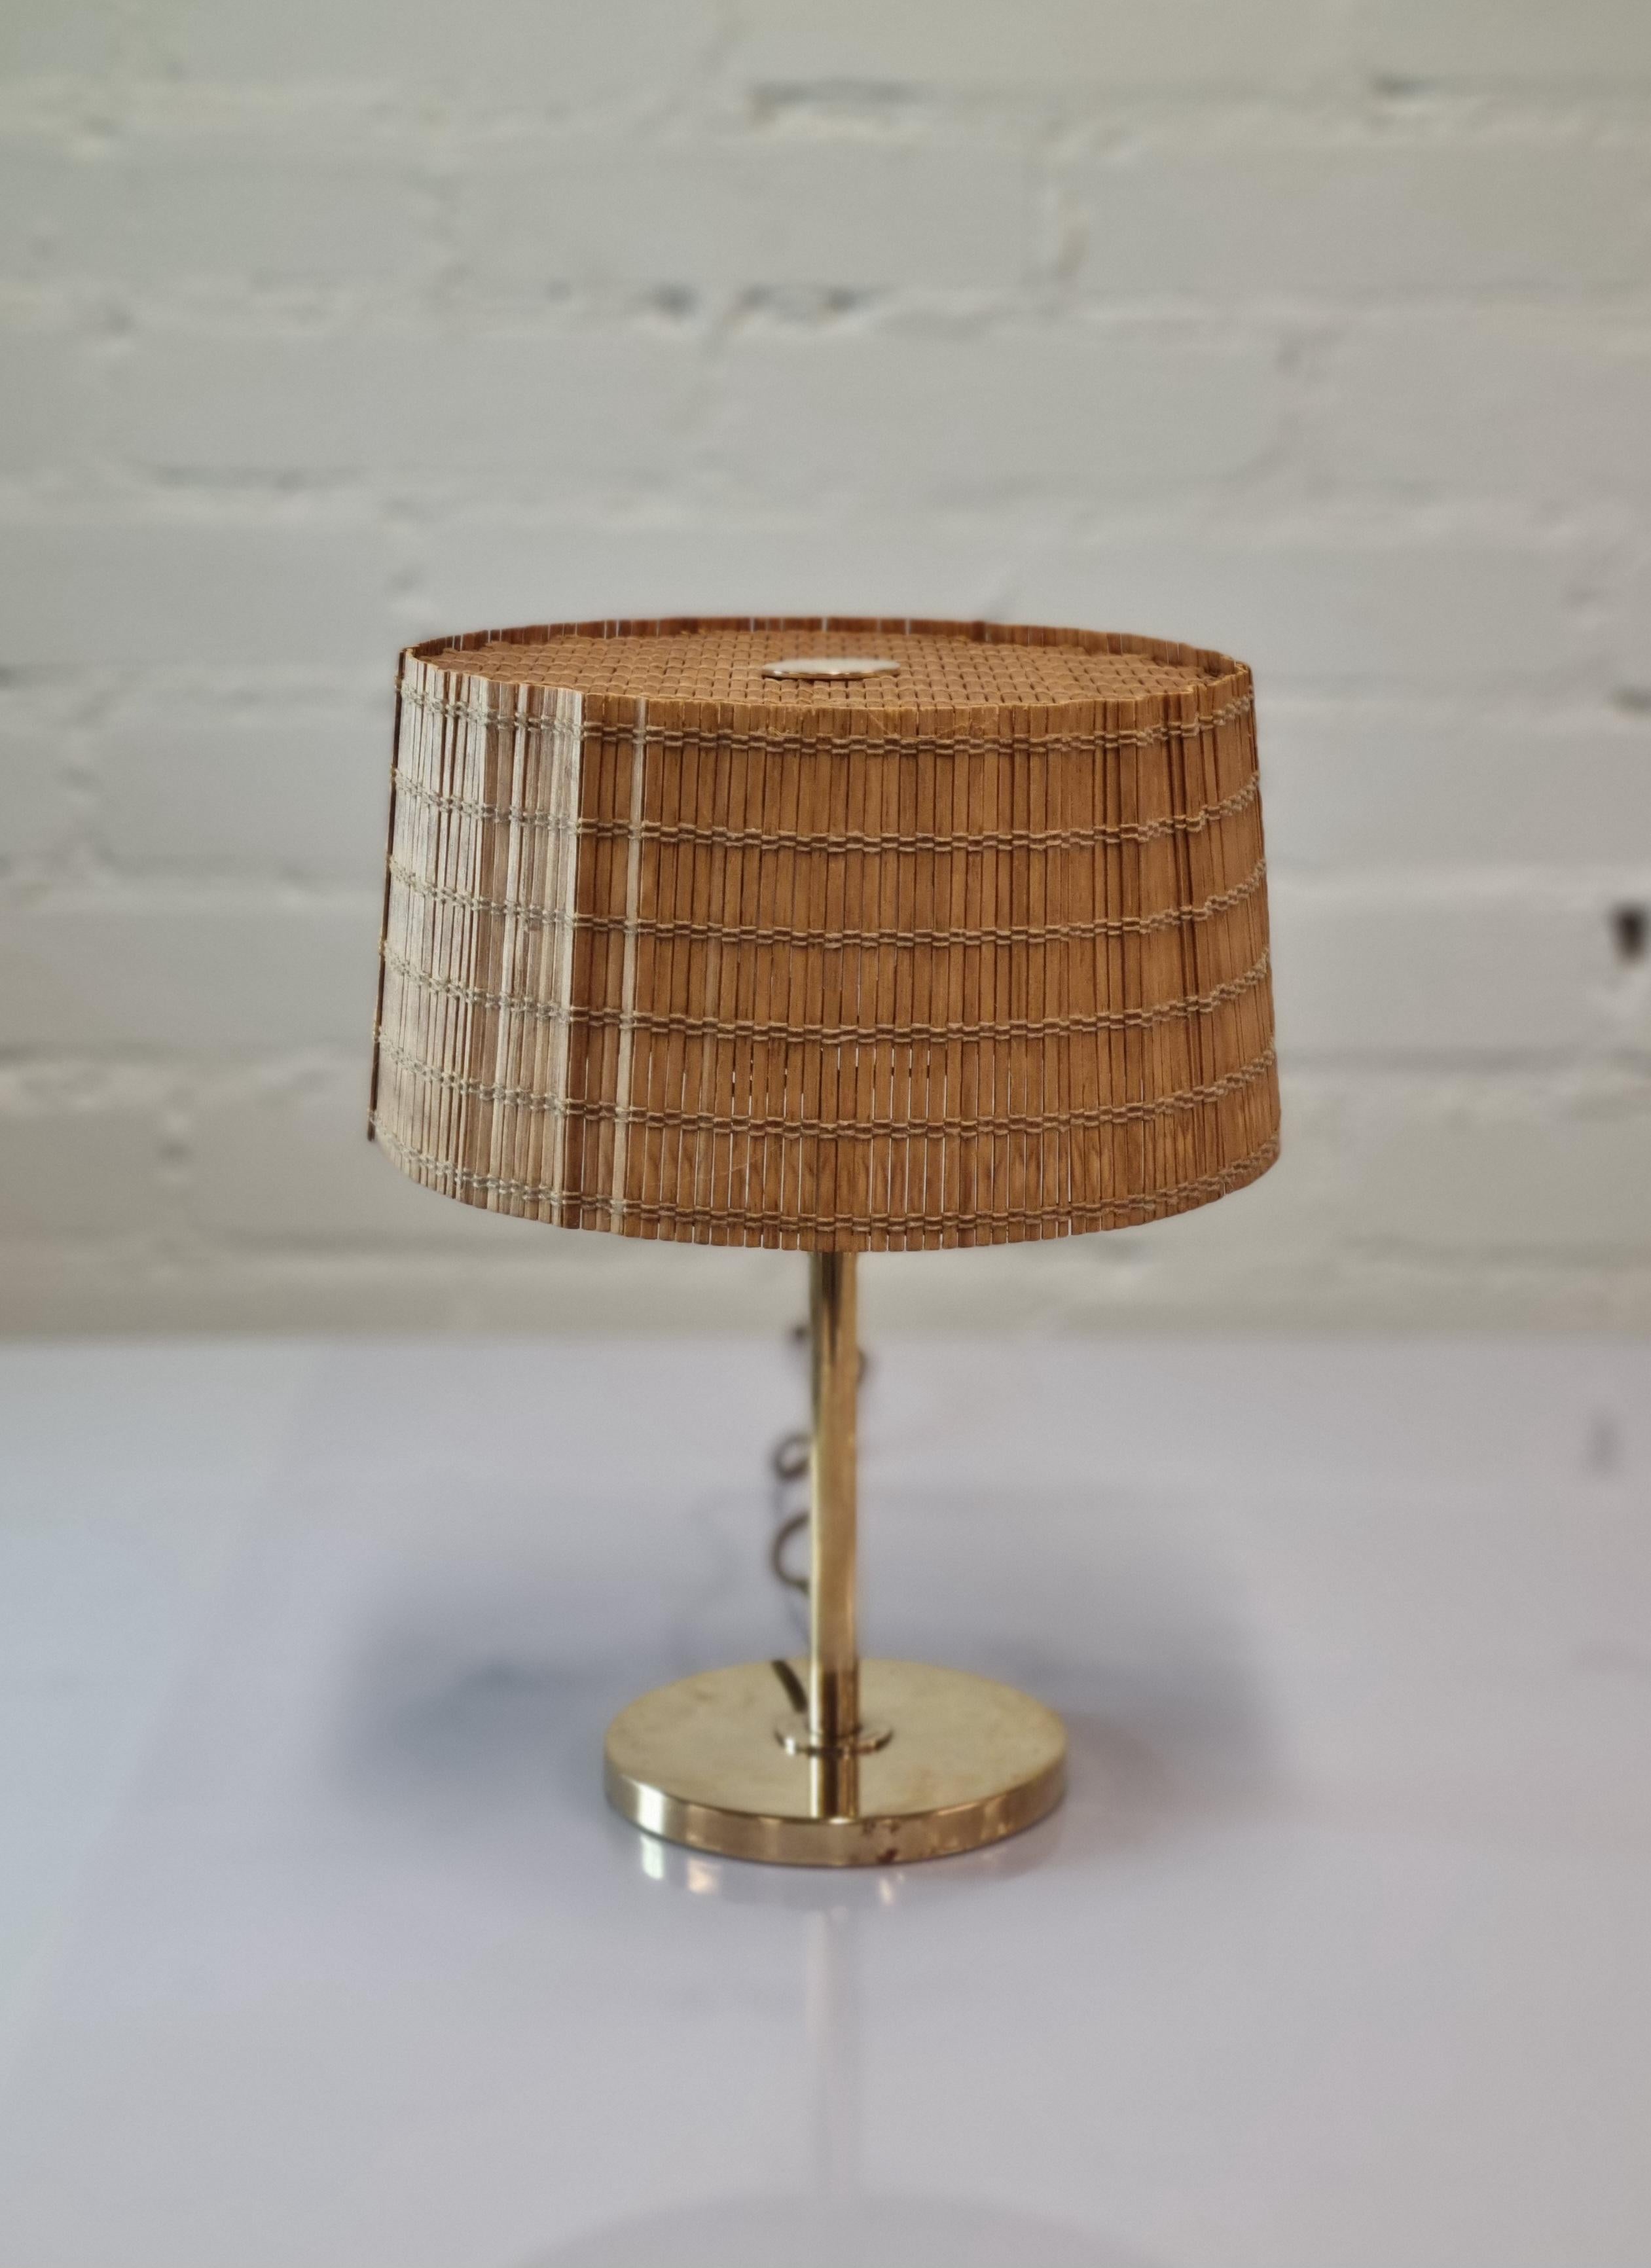 Finnish Paavo Tynell, Table Lamp Model 5144, Taito Oy For Sale